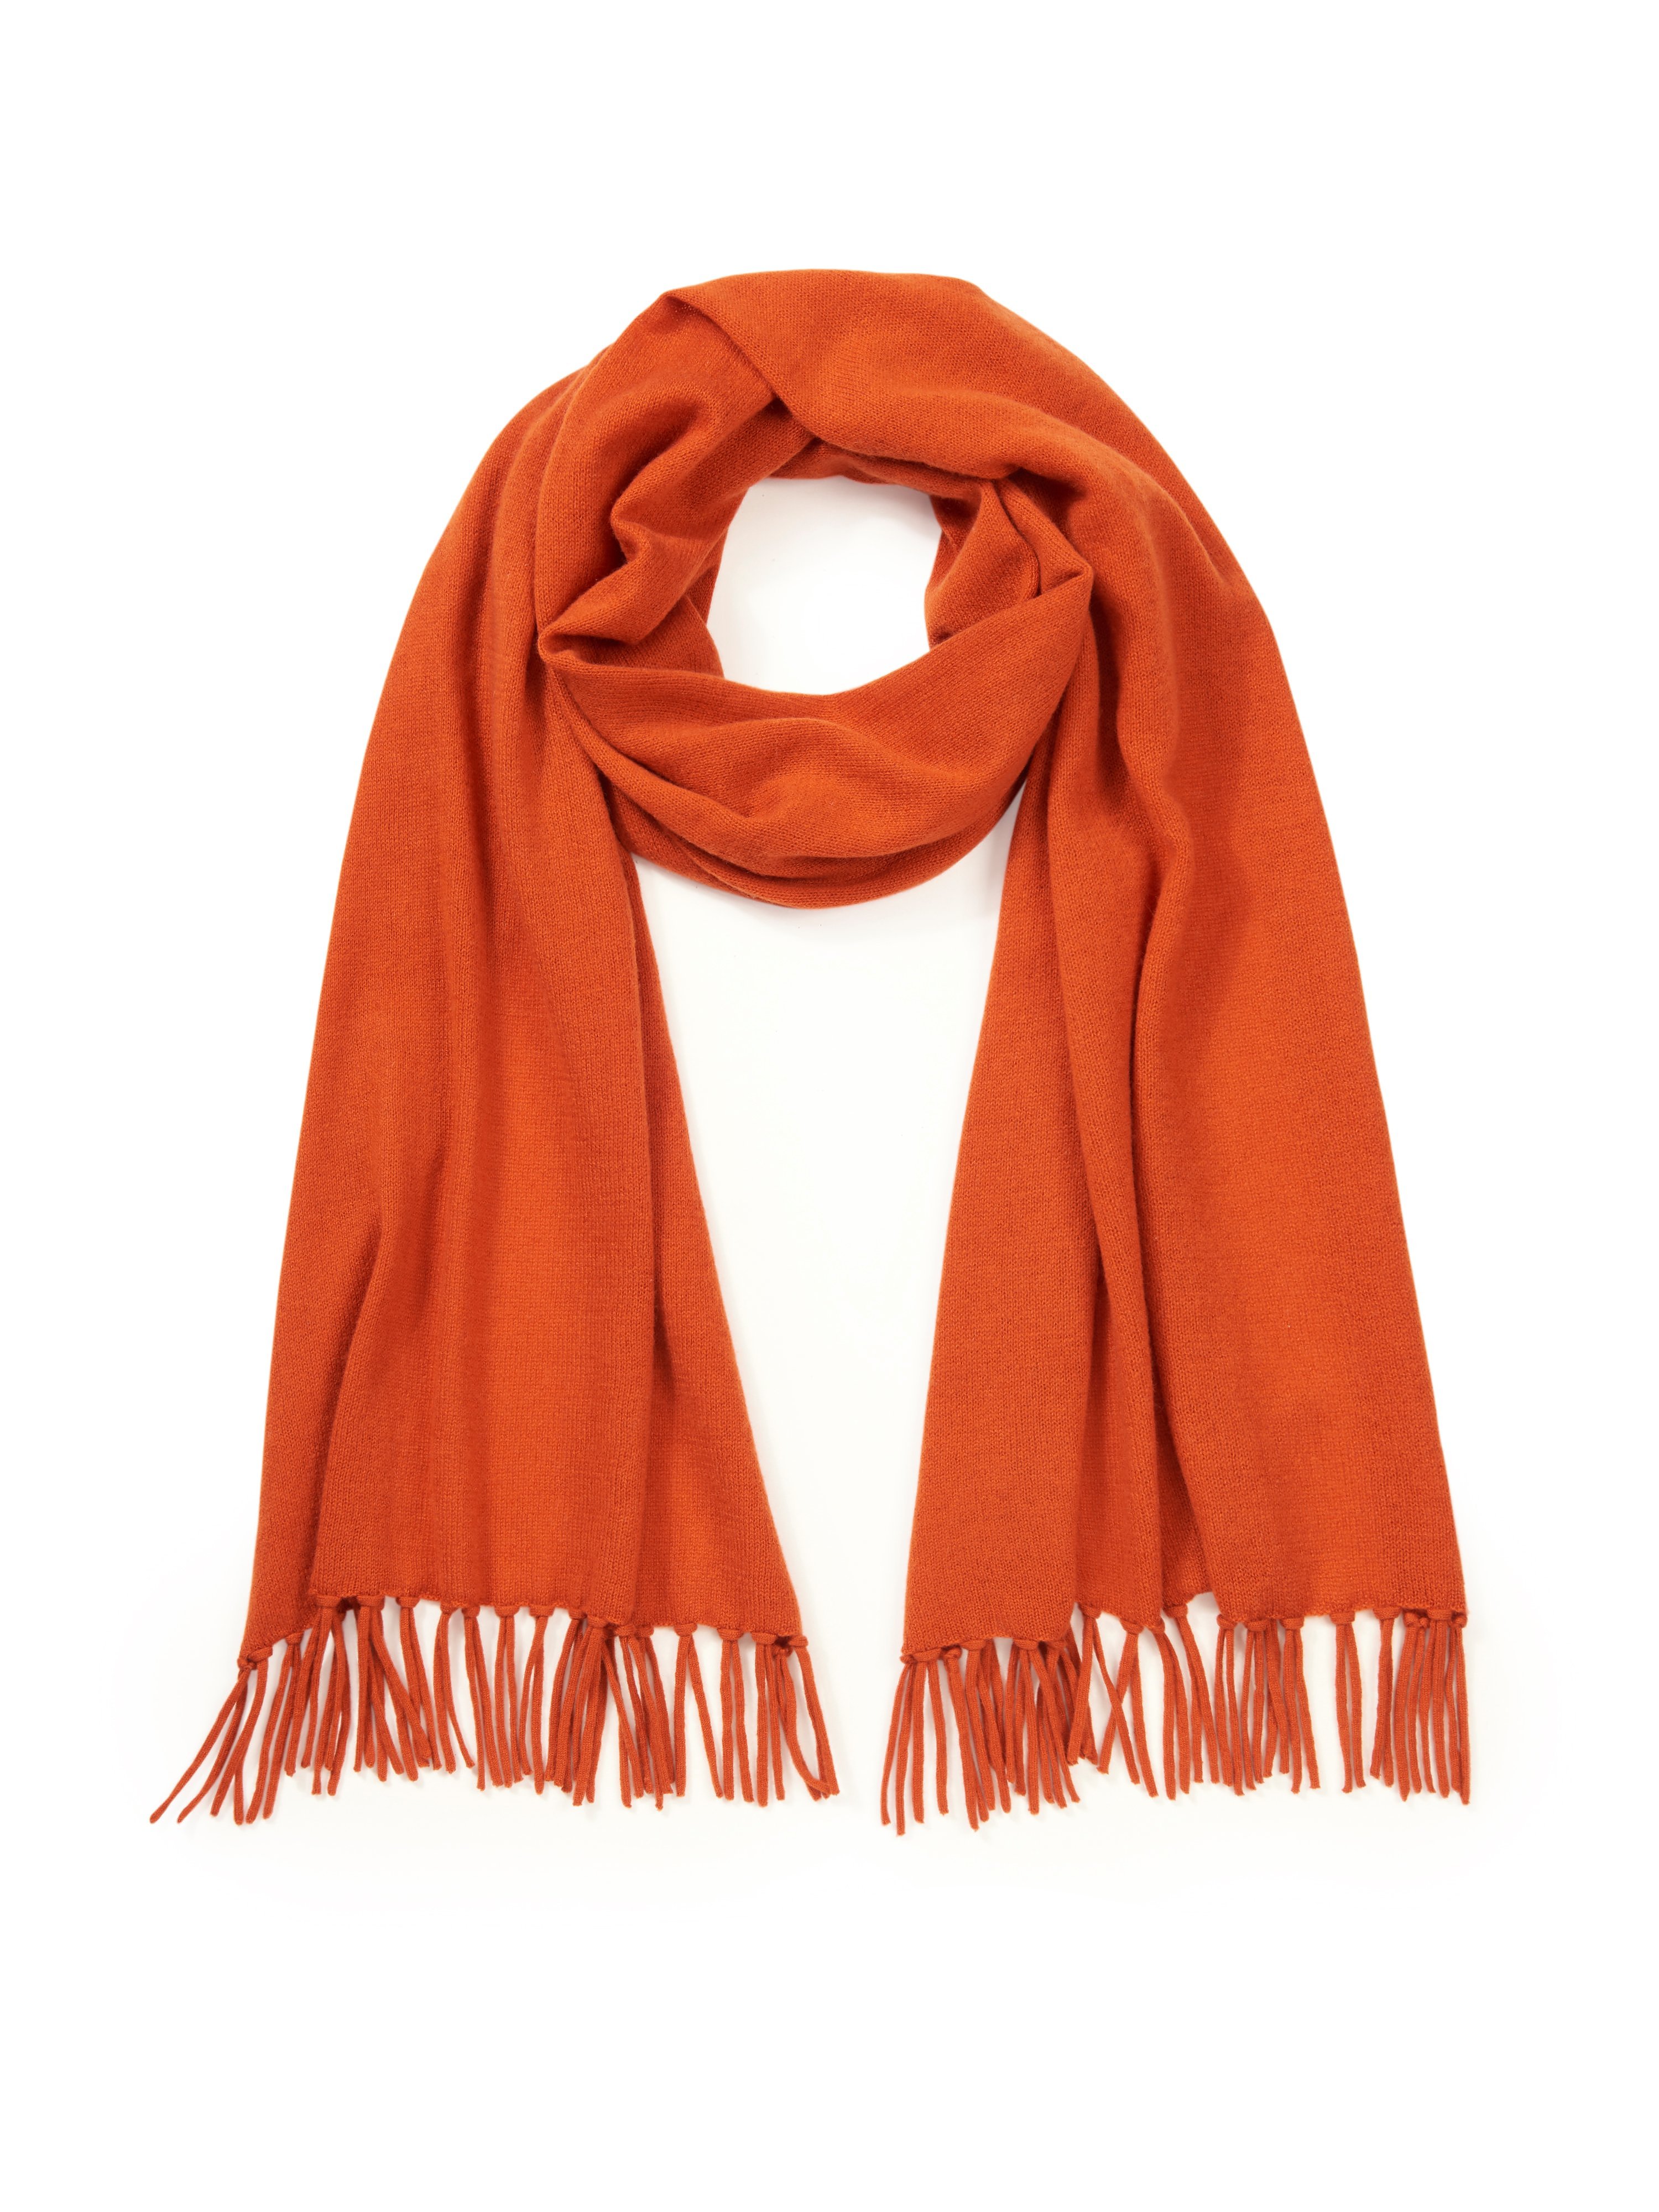 Scarf long fringes at the edges include orange